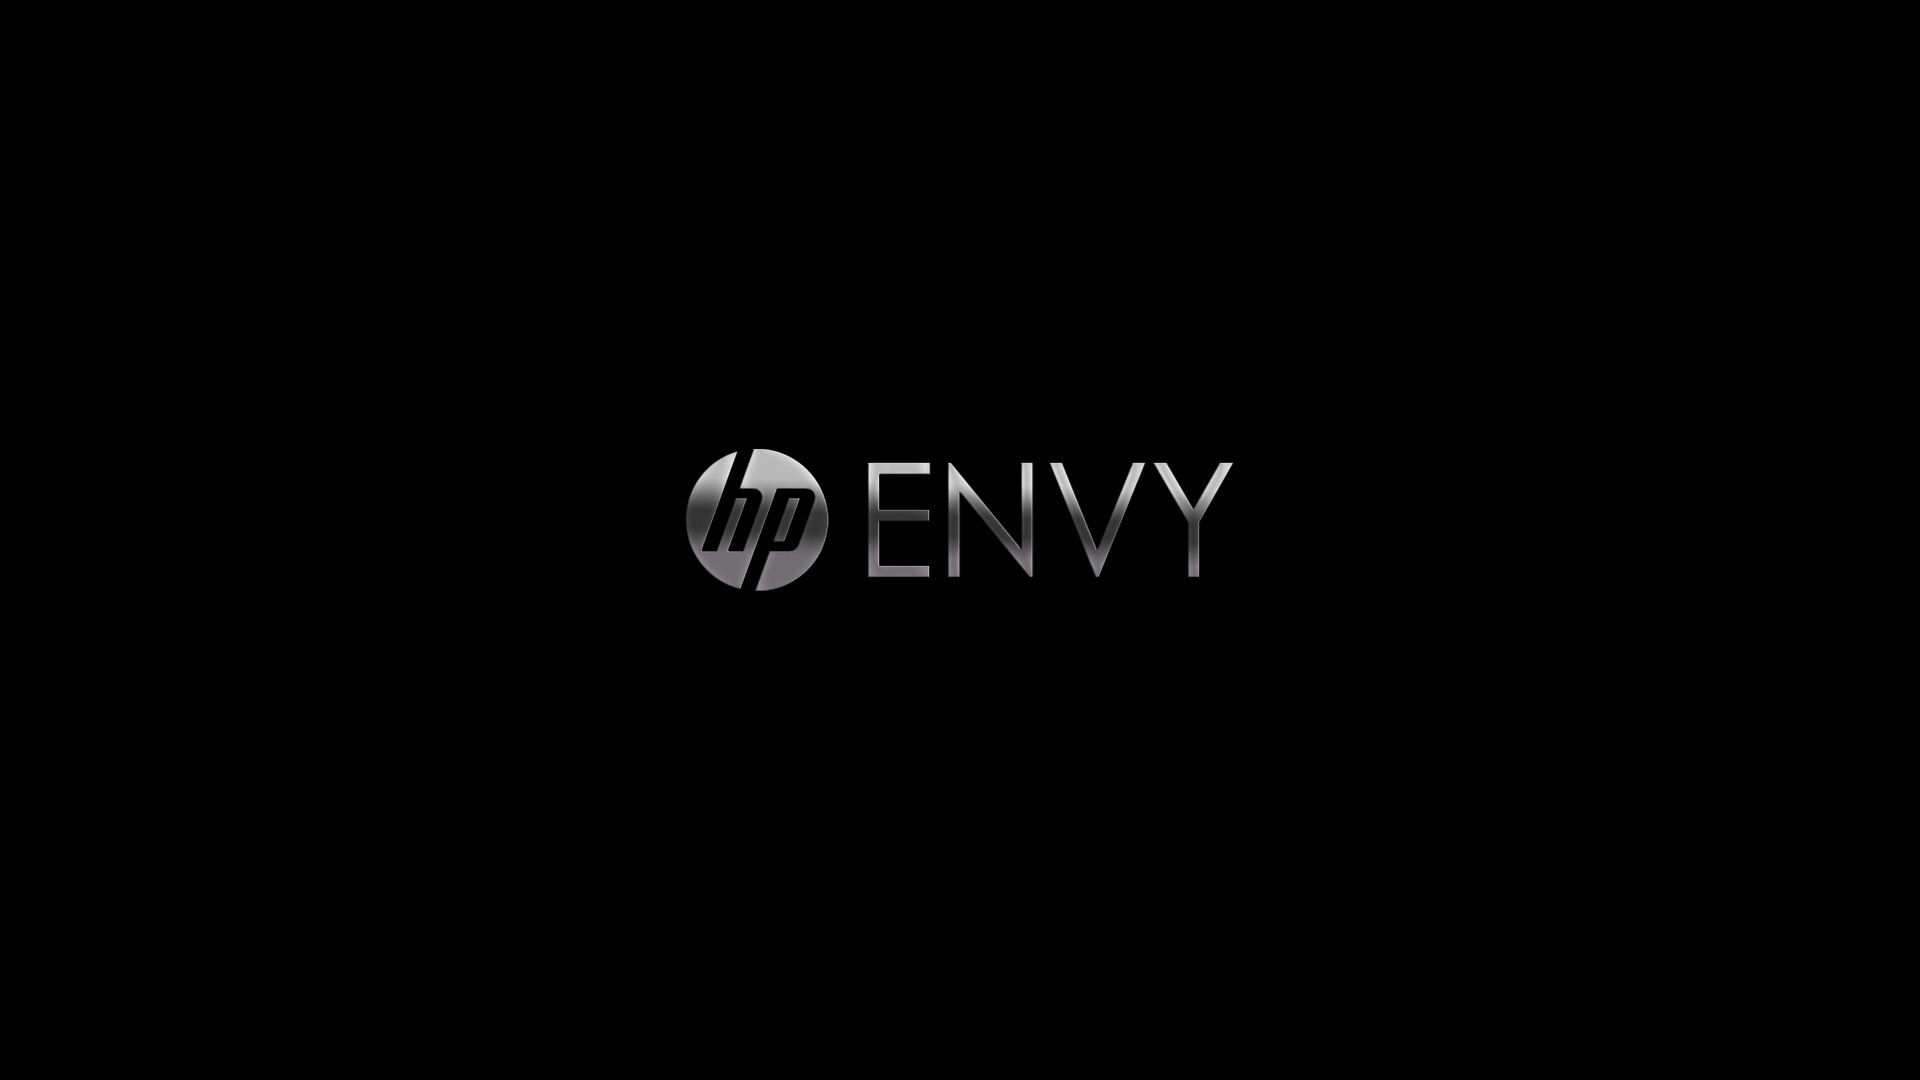 ENVY & Beats Themed Wallpapers & Icons NotebookReview